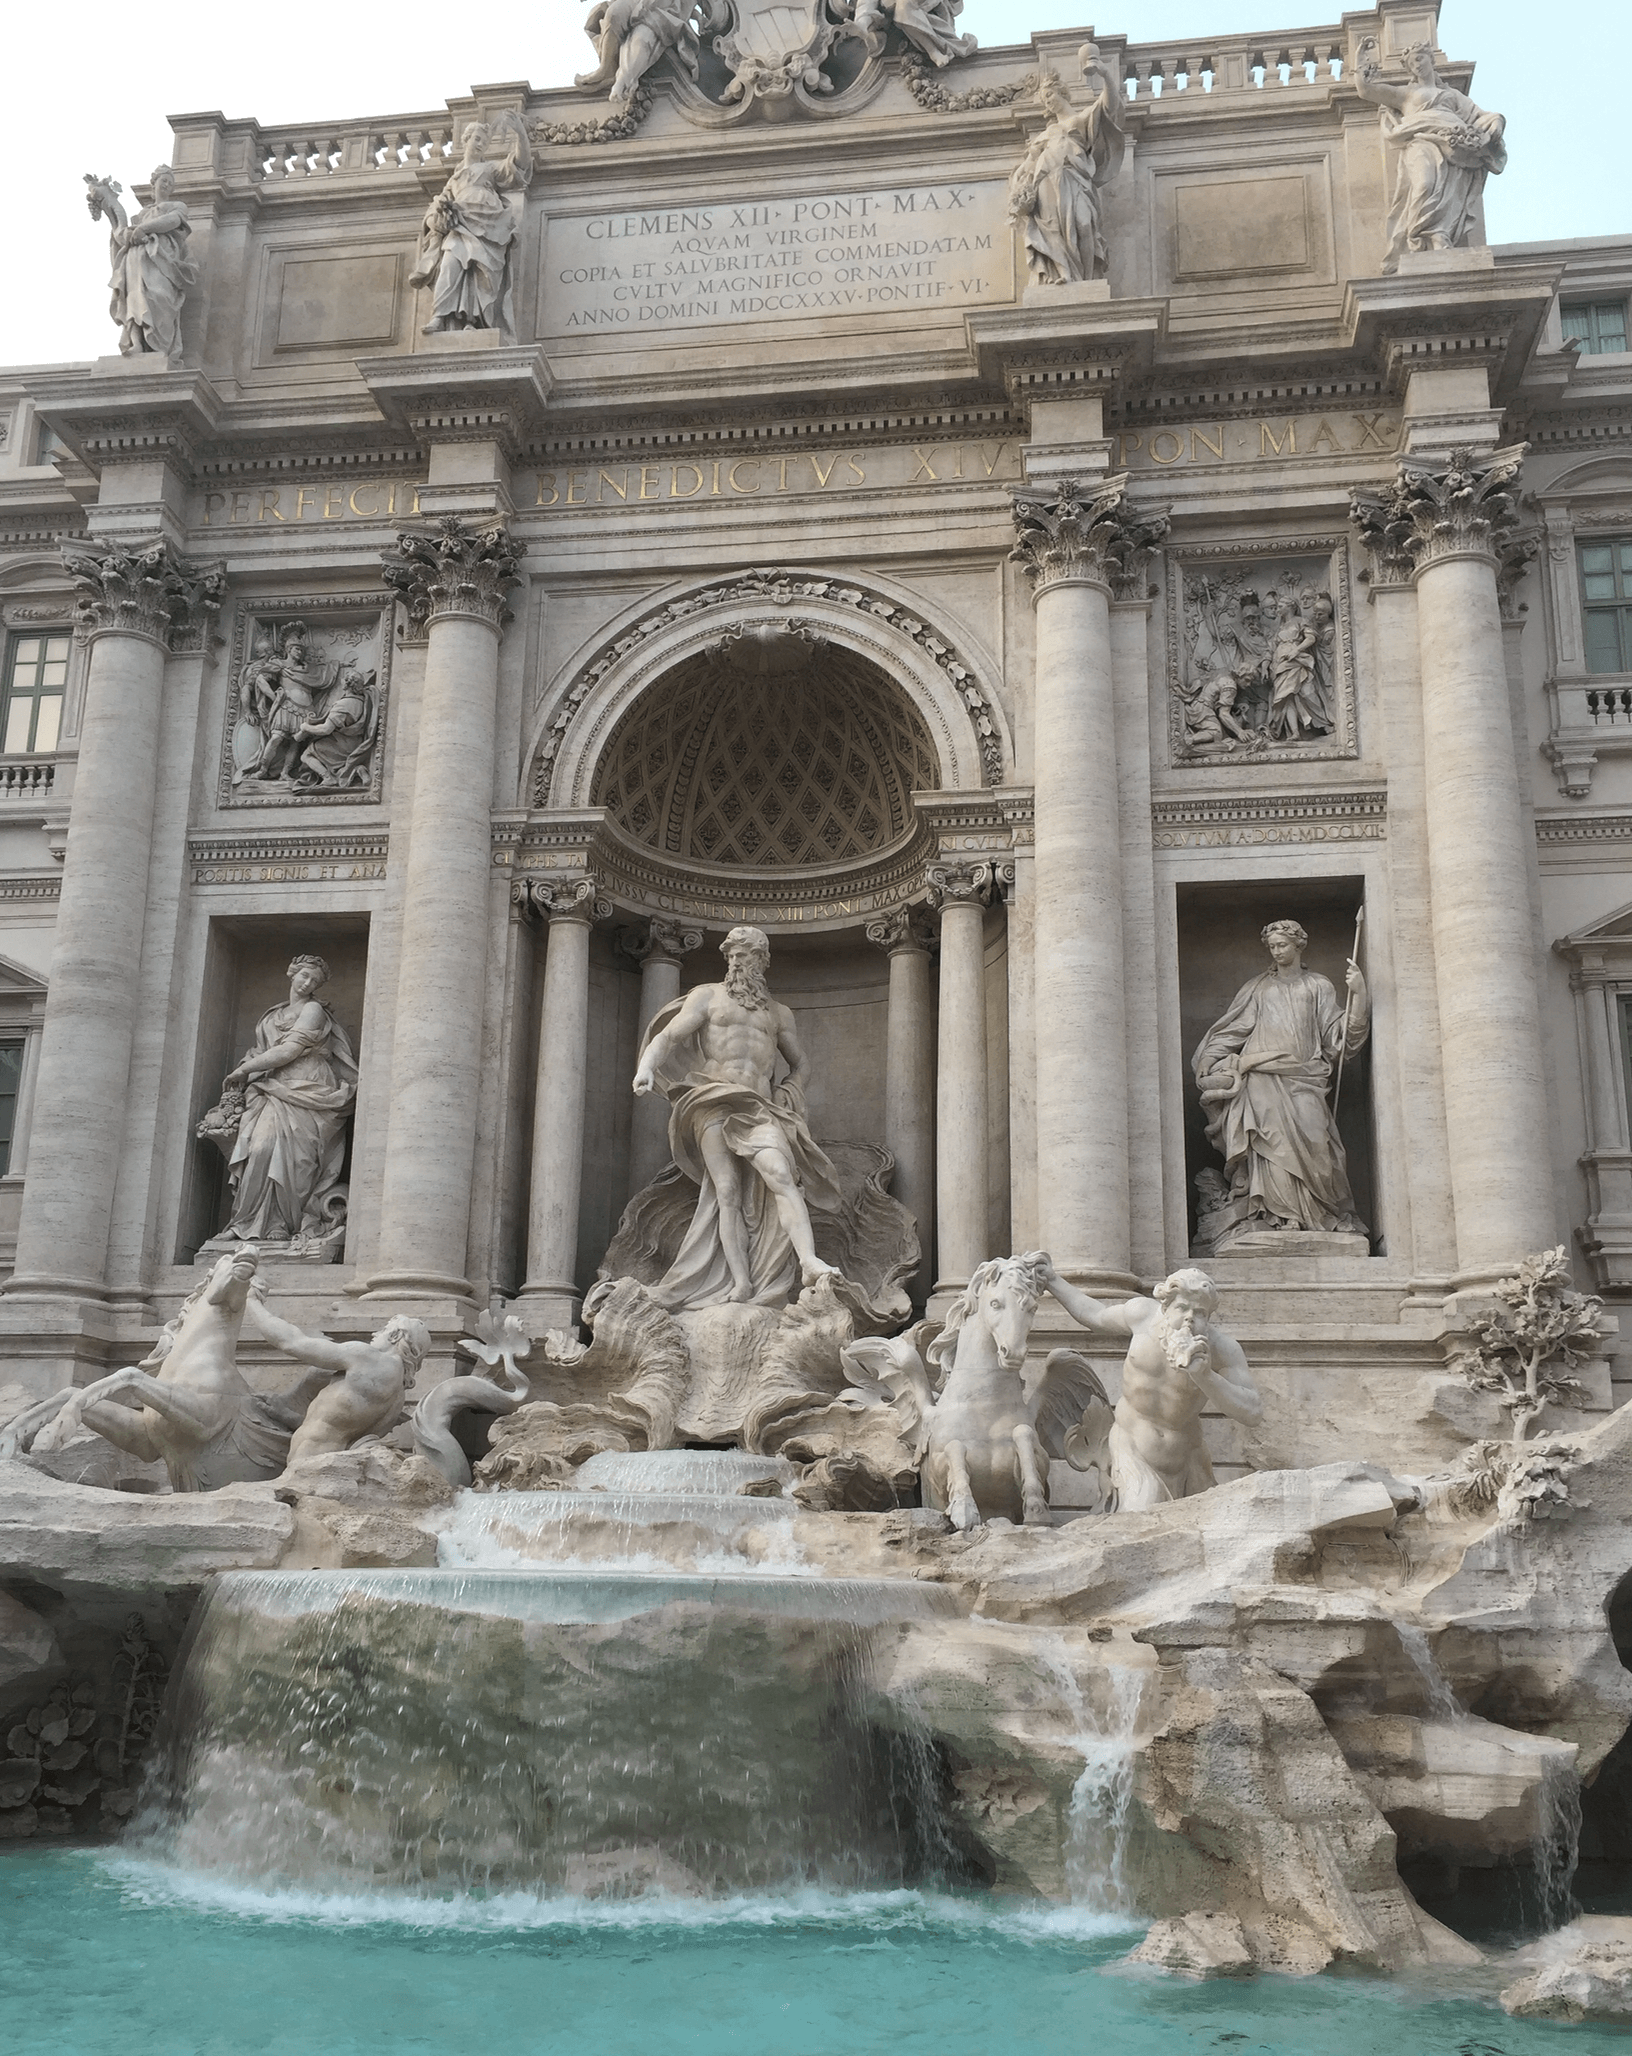 24 hours in Rome